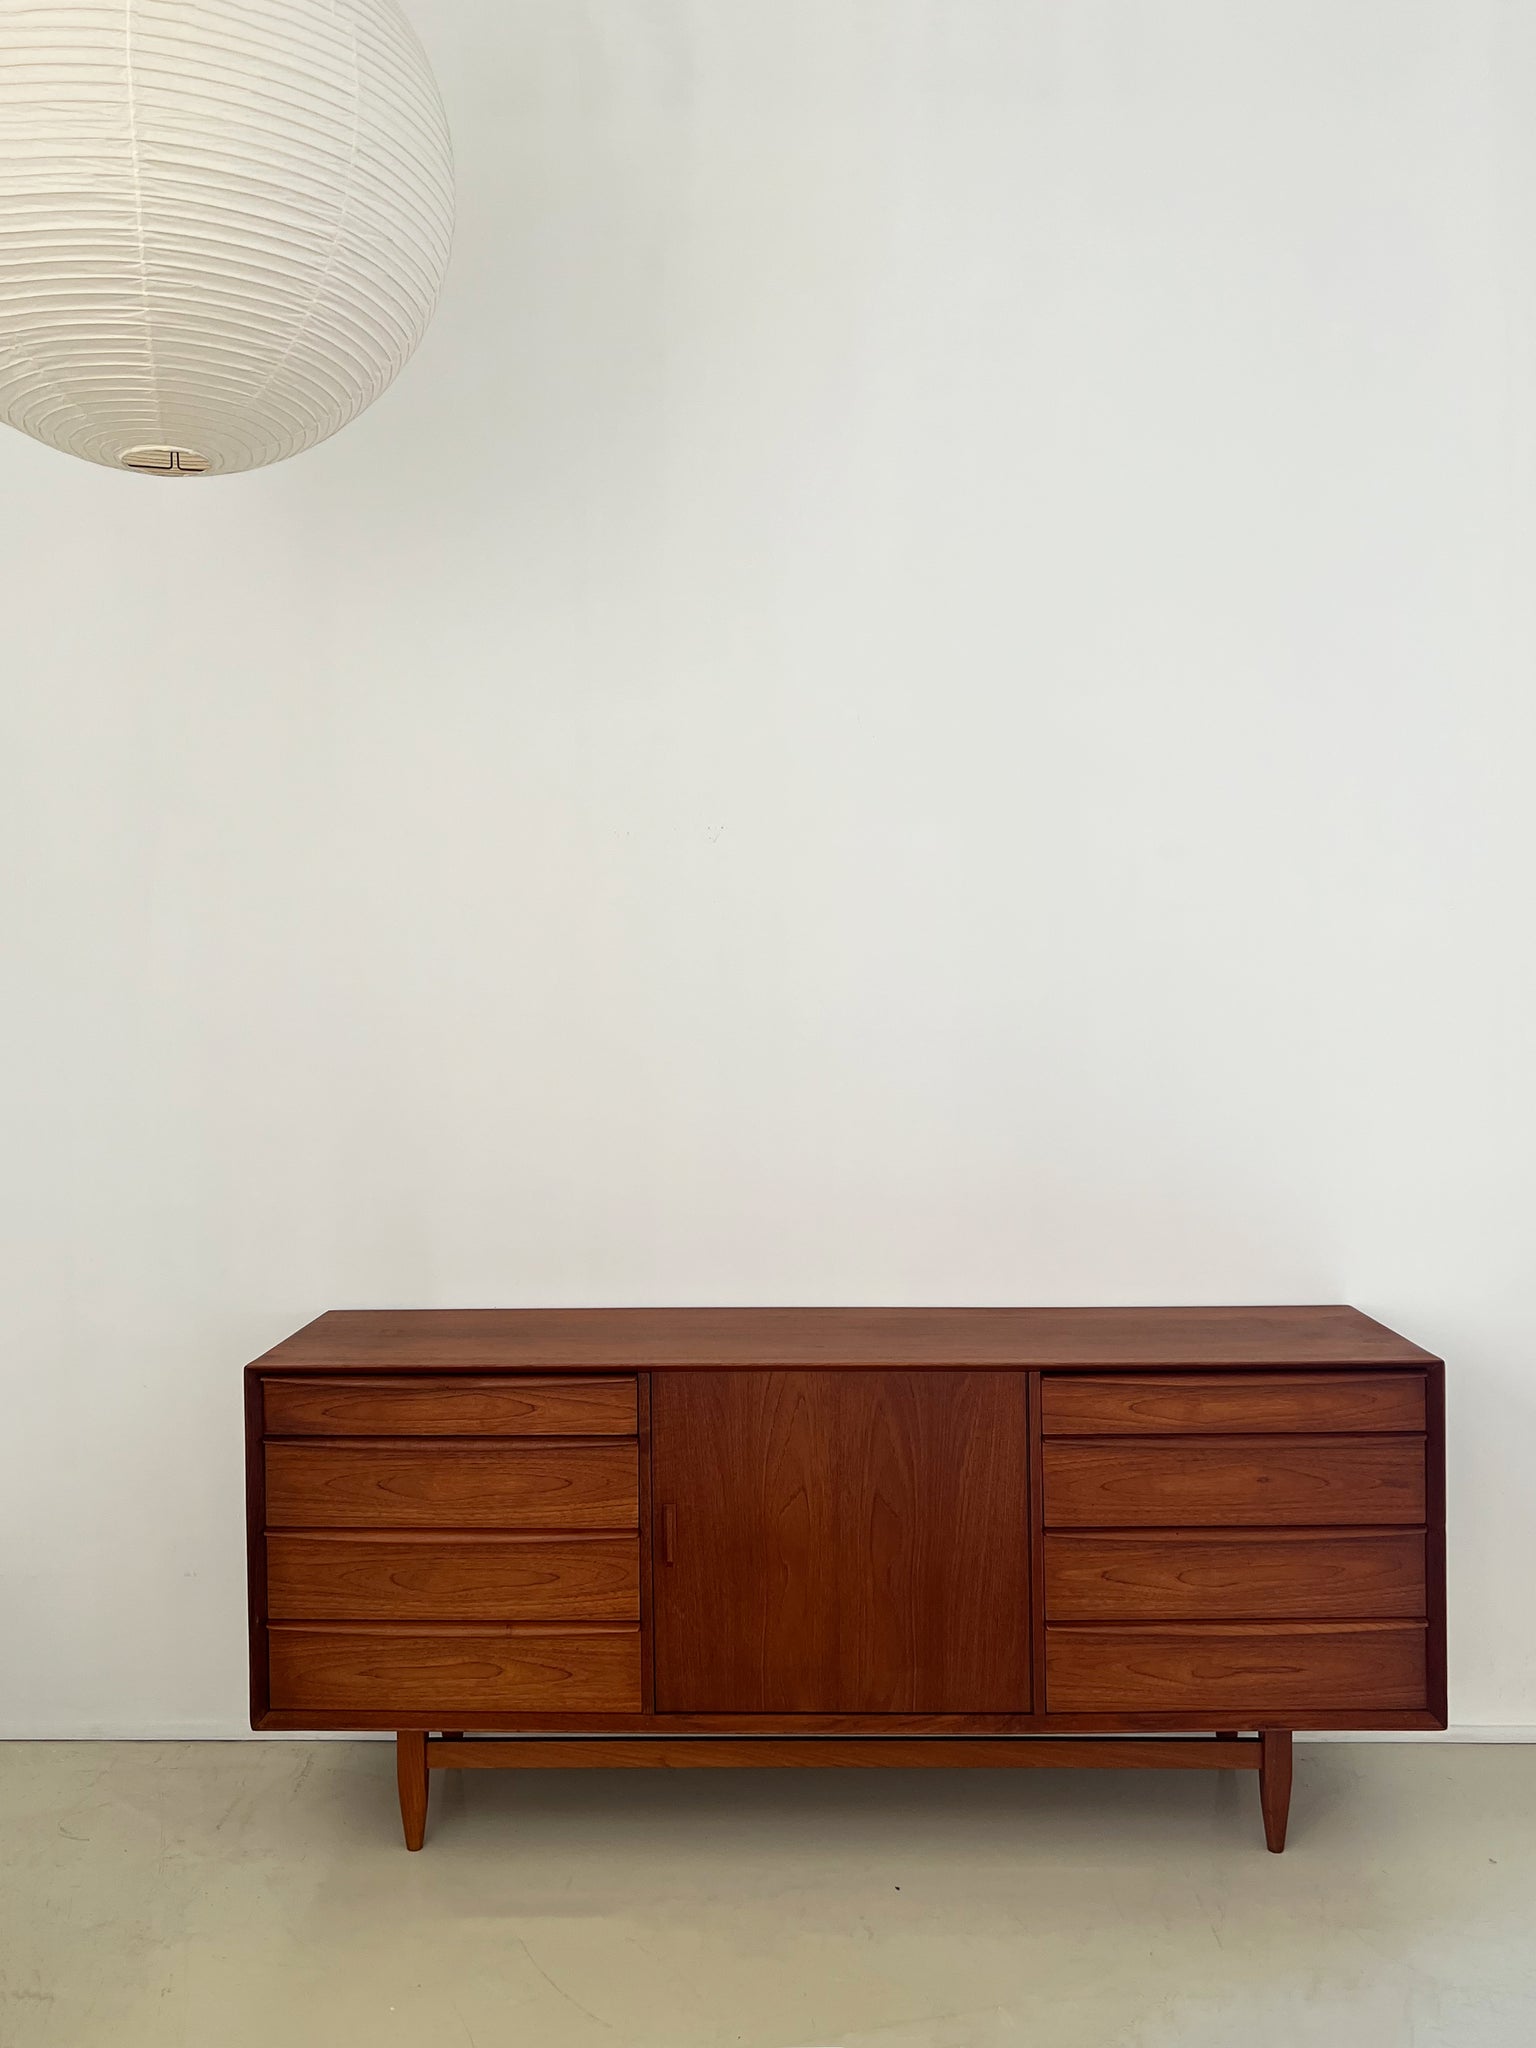 Danish Teak Mid Century Credenza by Svend Aage Madsen for Falster